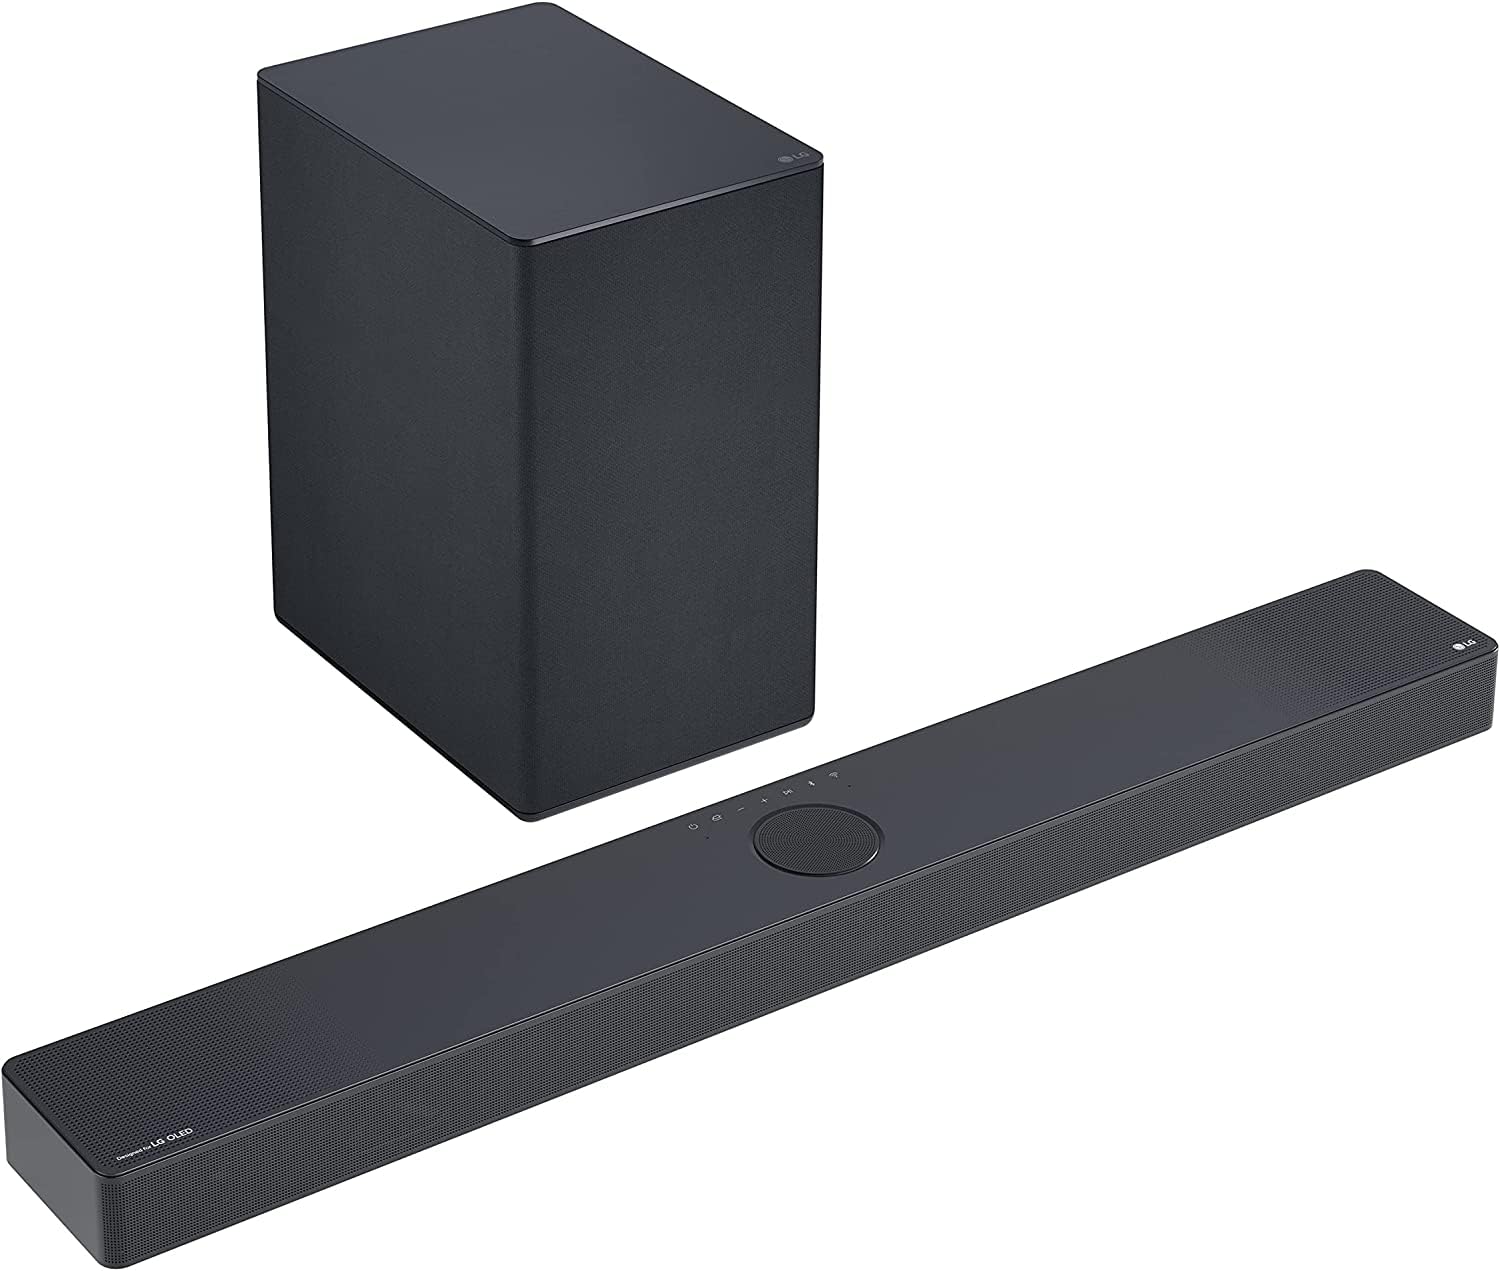 How To Pair LG Soundbar With Subwoofer Without Remote